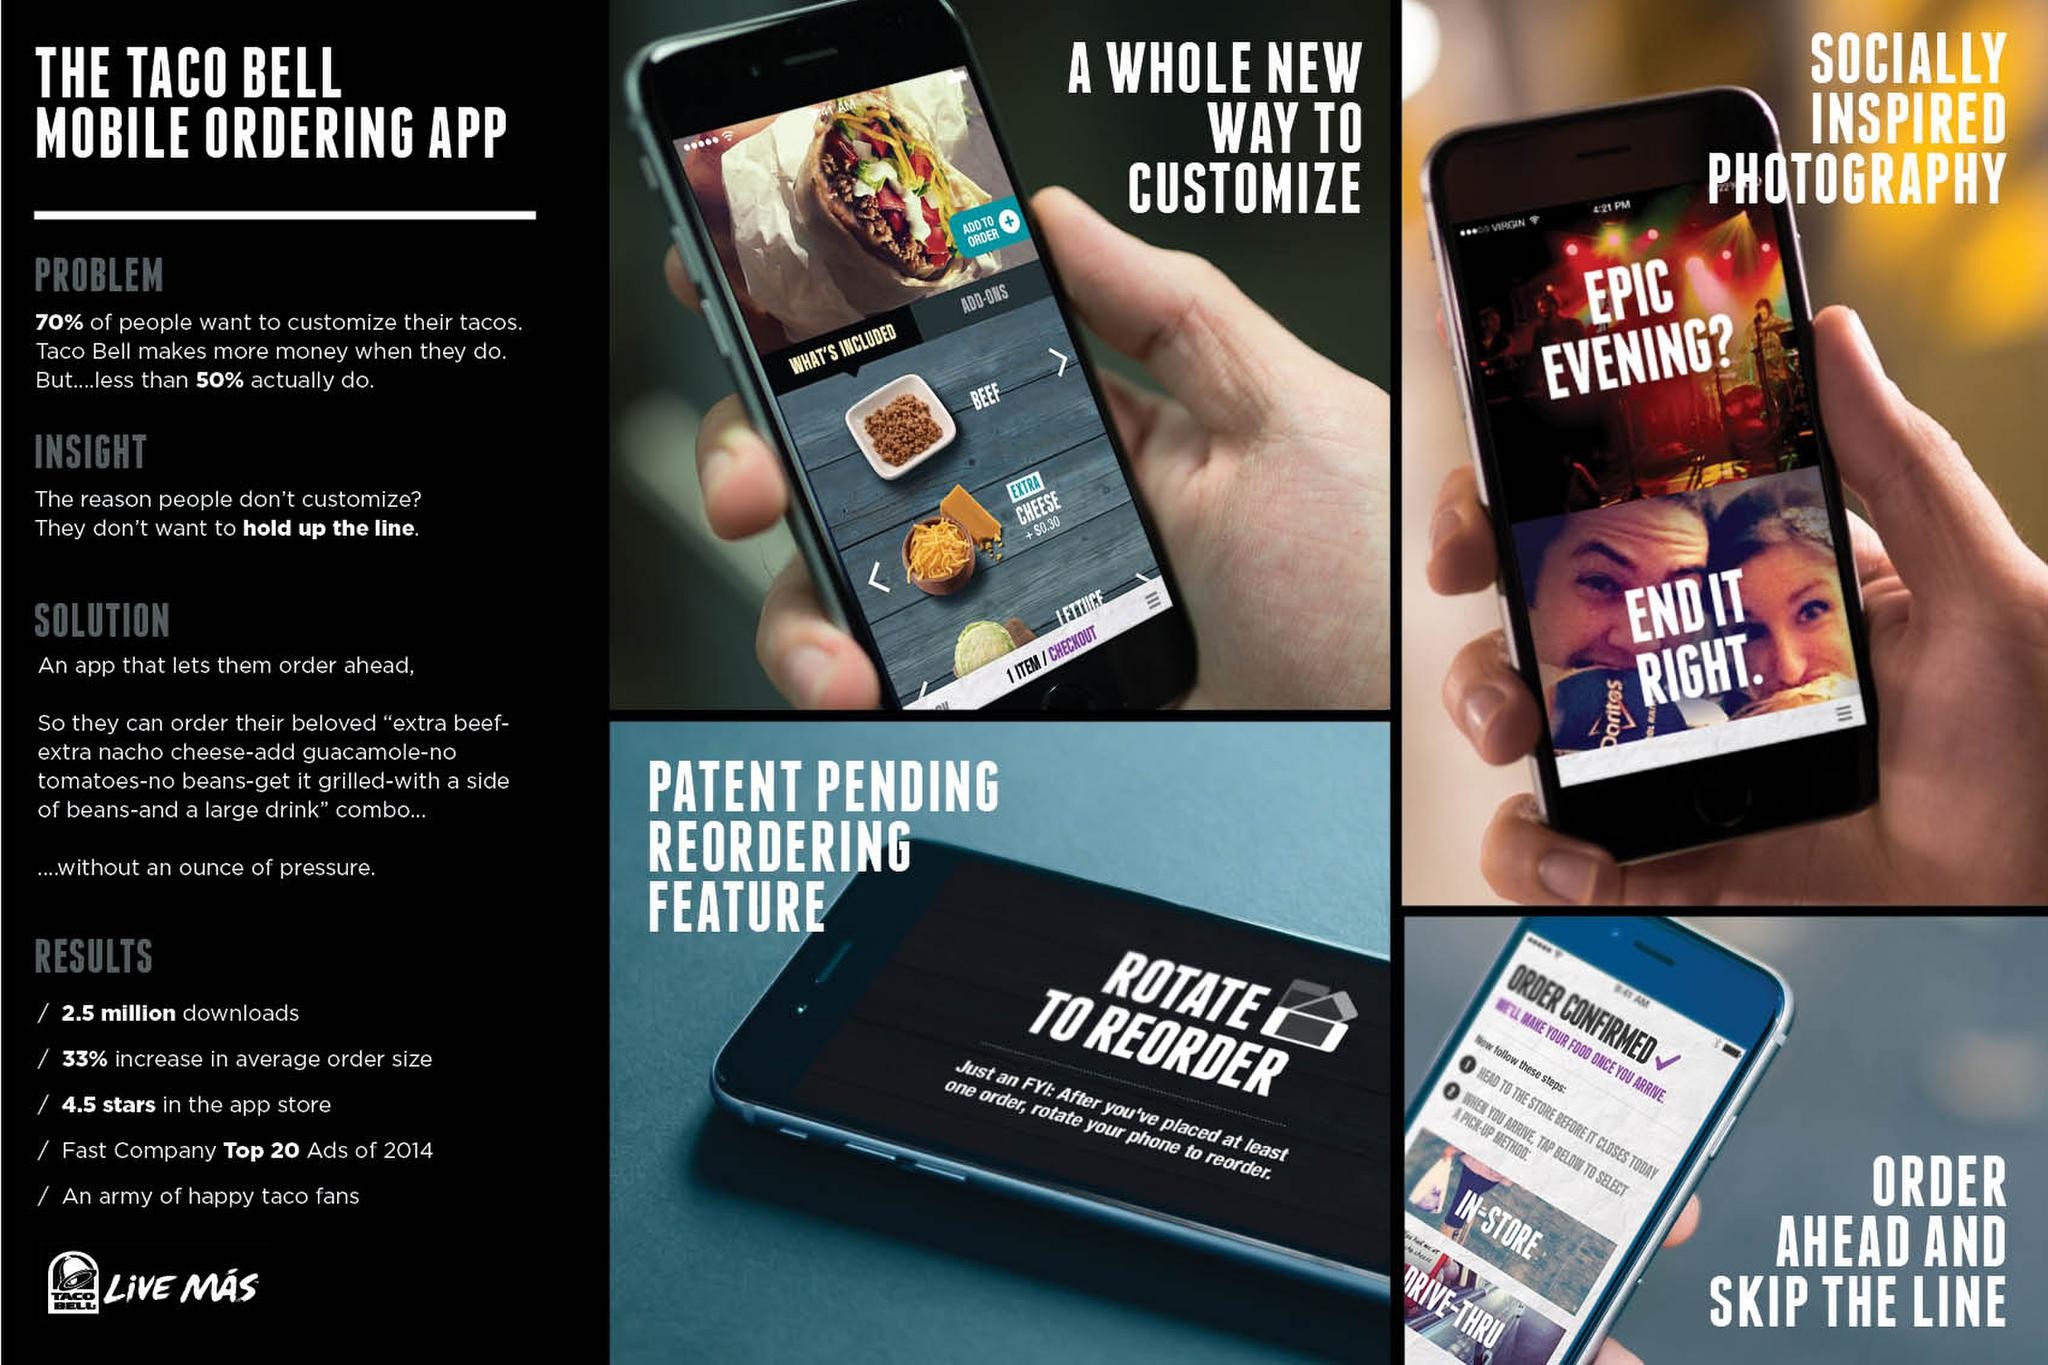 TACO BELL MOBILE ORDERING APPLICATION